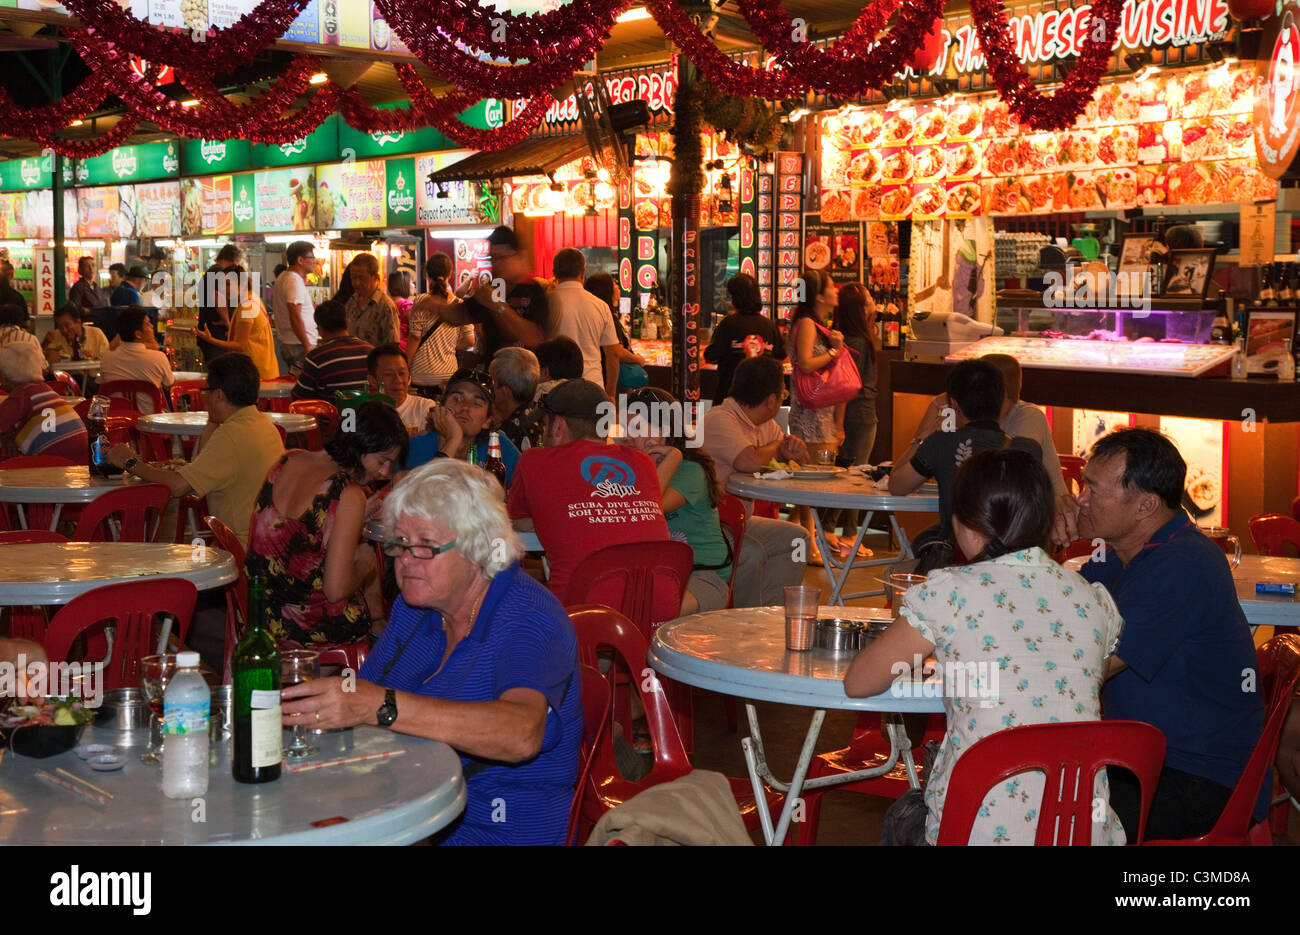 A Food Court in Penang, Malaysia Stock Photo - Alamy